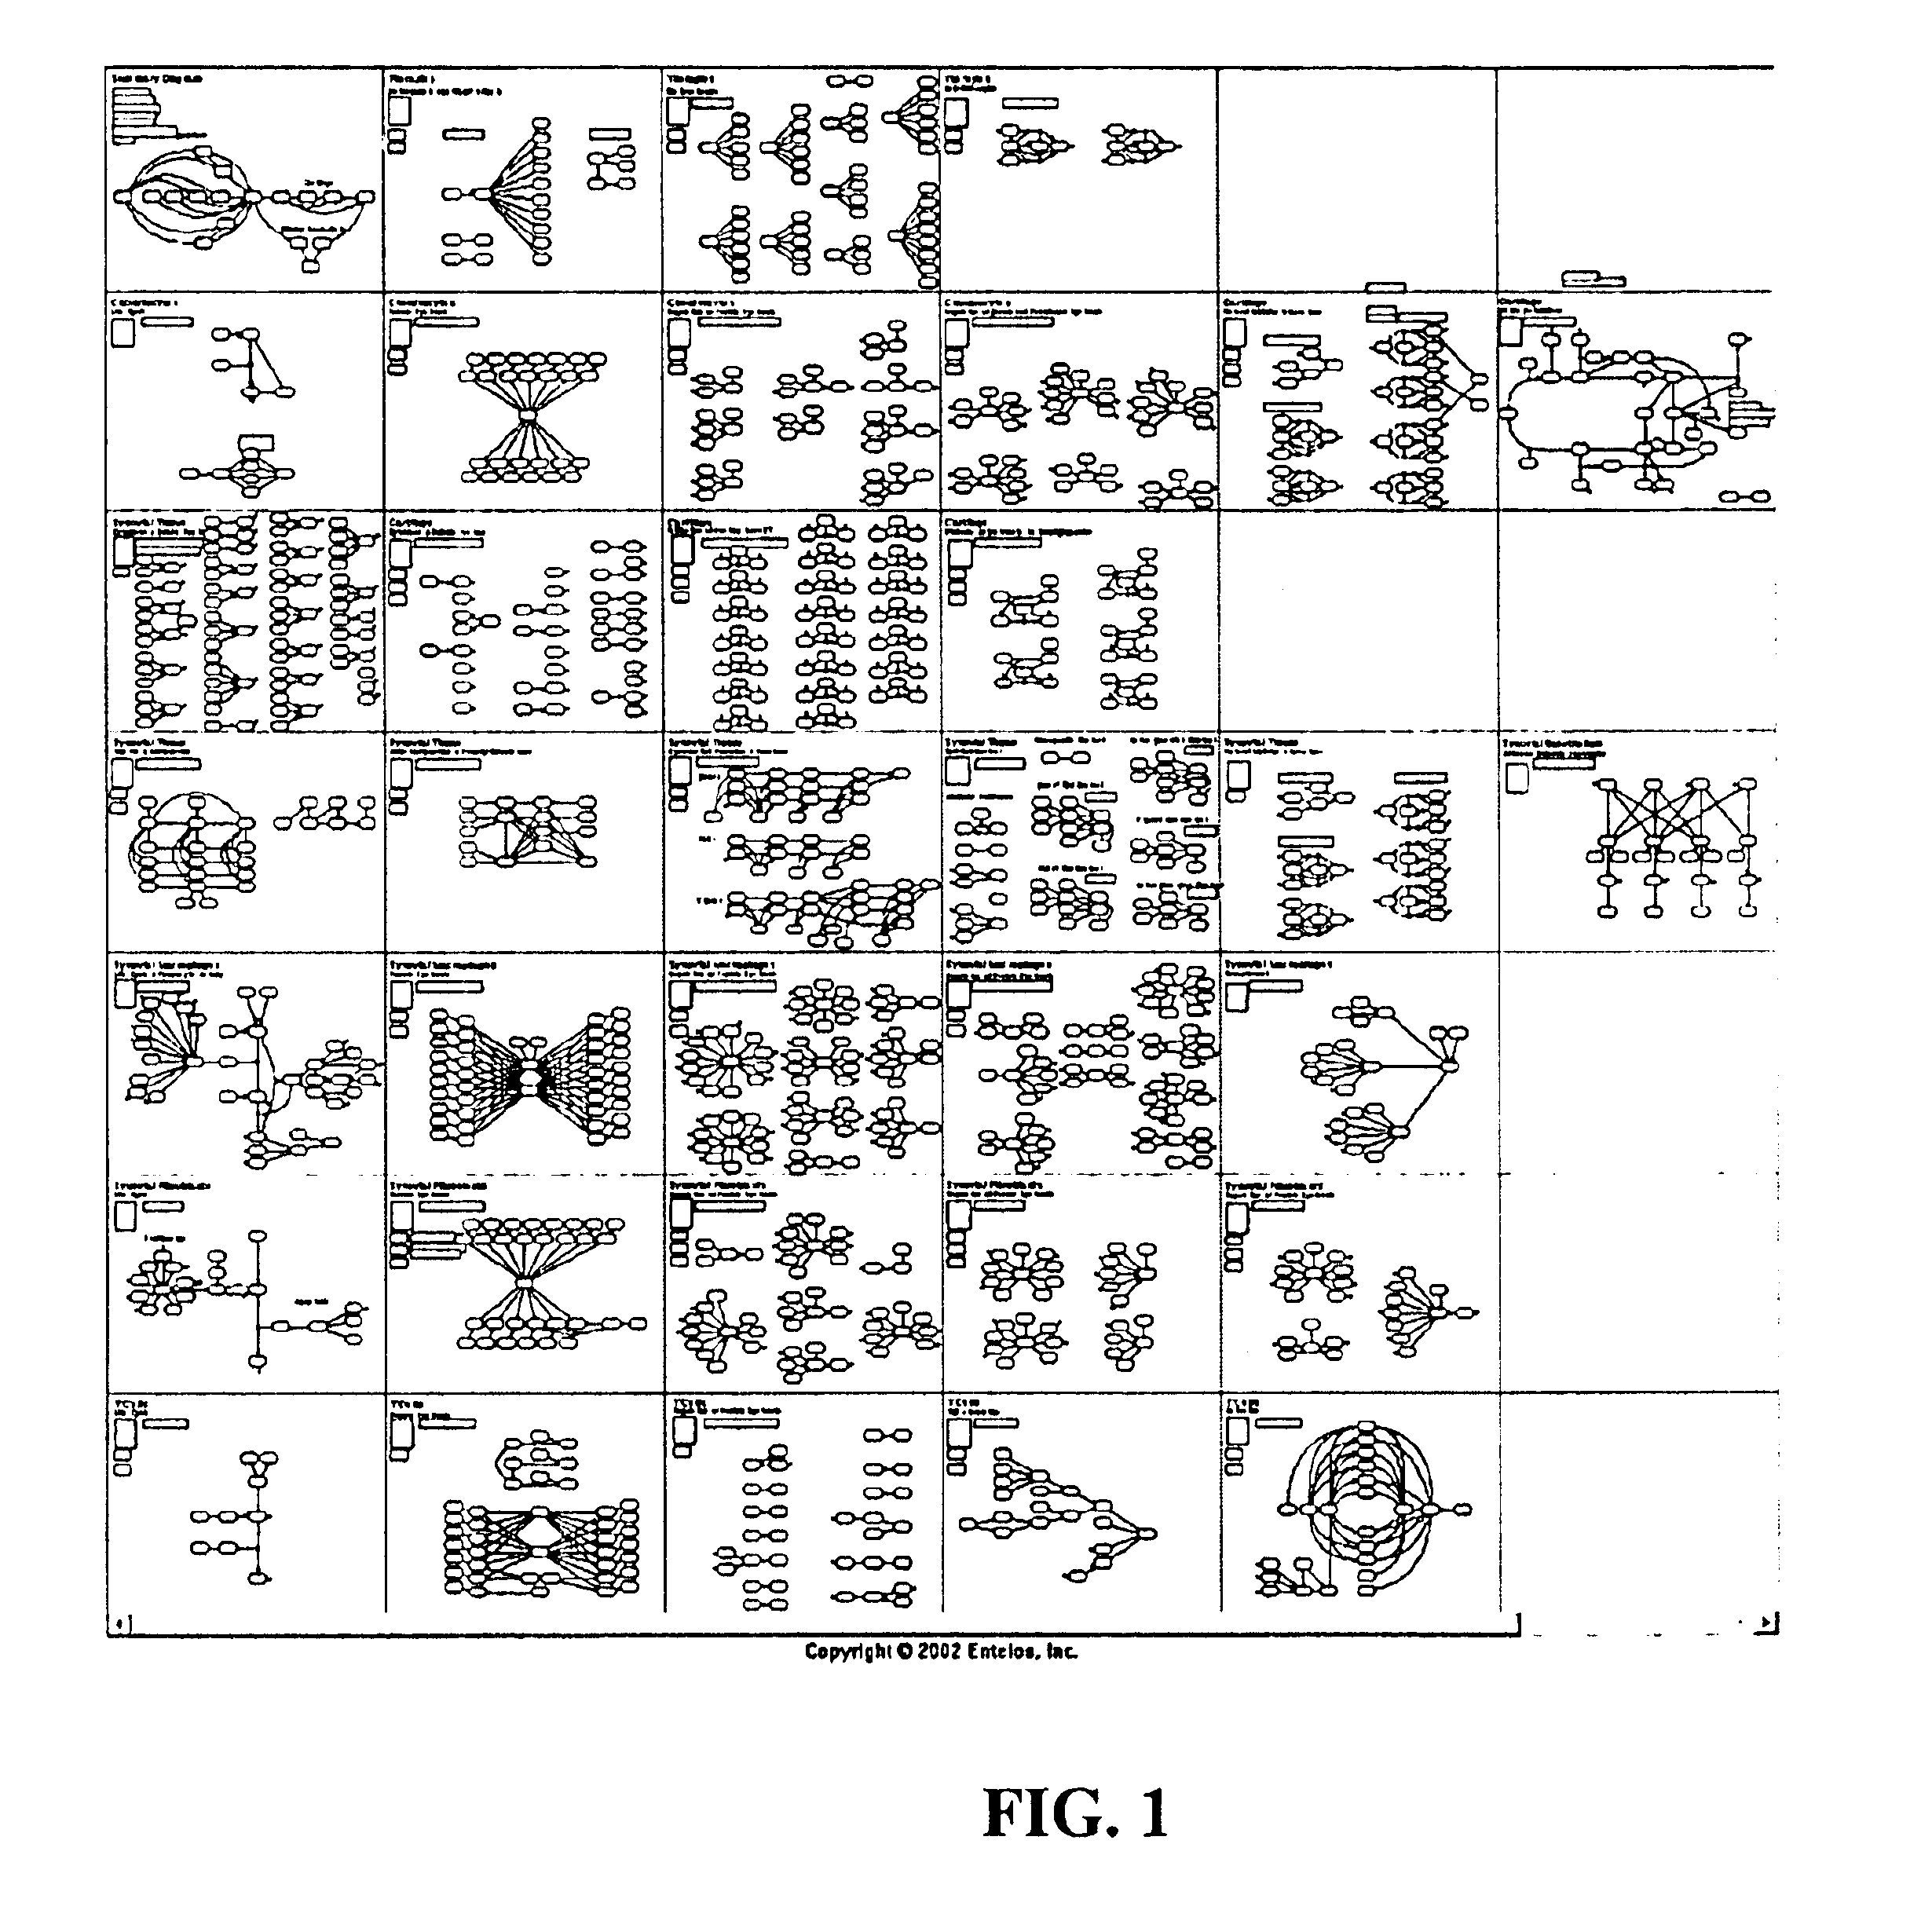 Method and apparatus for computer modeling a joint